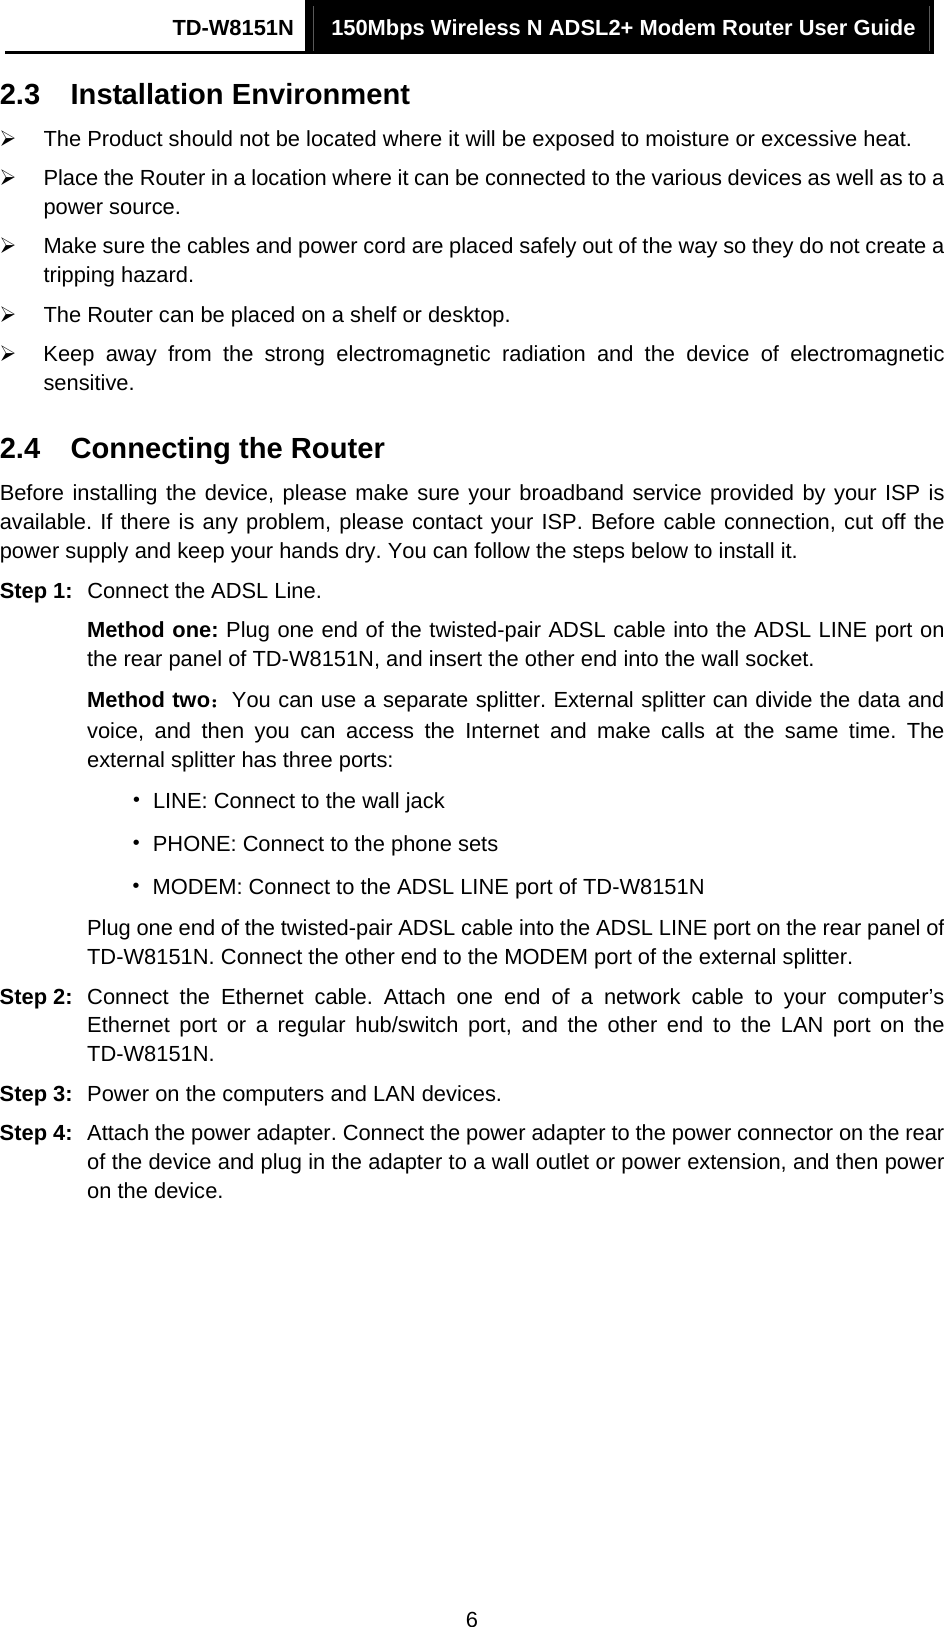 TD-W8151N  150Mbps Wireless N ADSL2+ Modem Router User Guide  62.3  Installation Environment ¾  The Product should not be located where it will be exposed to moisture or excessive heat. ¾  Place the Router in a location where it can be connected to the various devices as well as to a power source. ¾  Make sure the cables and power cord are placed safely out of the way so they do not create a tripping hazard. ¾  The Router can be placed on a shelf or desktop. ¾  Keep away from the strong electromagnetic radiation and the device of electromagnetic sensitive. 2.4  Connecting the Router Before installing the device, please make sure your broadband service provided by your ISP is available. If there is any problem, please contact your ISP. Before cable connection, cut off the power supply and keep your hands dry. You can follow the steps below to install it. Step 1:  Connect the ADSL Line. Method one: Plug one end of the twisted-pair ADSL cable into the ADSL LINE port on the rear panel of TD-W8151N, and insert the other end into the wall socket. Method two：You can use a separate splitter. External splitter can divide the data and voice, and then you can access the Internet and make calls at the same time. The external splitter has three ports: •  LINE: Connect to the wall jack •  PHONE: Connect to the phone sets •  MODEM: Connect to the ADSL LINE port of TD-W8151N Plug one end of the twisted-pair ADSL cable into the ADSL LINE port on the rear panel of TD-W8151N. Connect the other end to the MODEM port of the external splitter. Step 2:  Connect the Ethernet cable. Attach one end of a network cable to your computer’s Ethernet port or a regular hub/switch port, and the other end to the LAN port on the TD-W8151N. Step 3:  Power on the computers and LAN devices. Step 4:  Attach the power adapter. Connect the power adapter to the power connector on the rear of the device and plug in the adapter to a wall outlet or power extension, and then power on the device. 